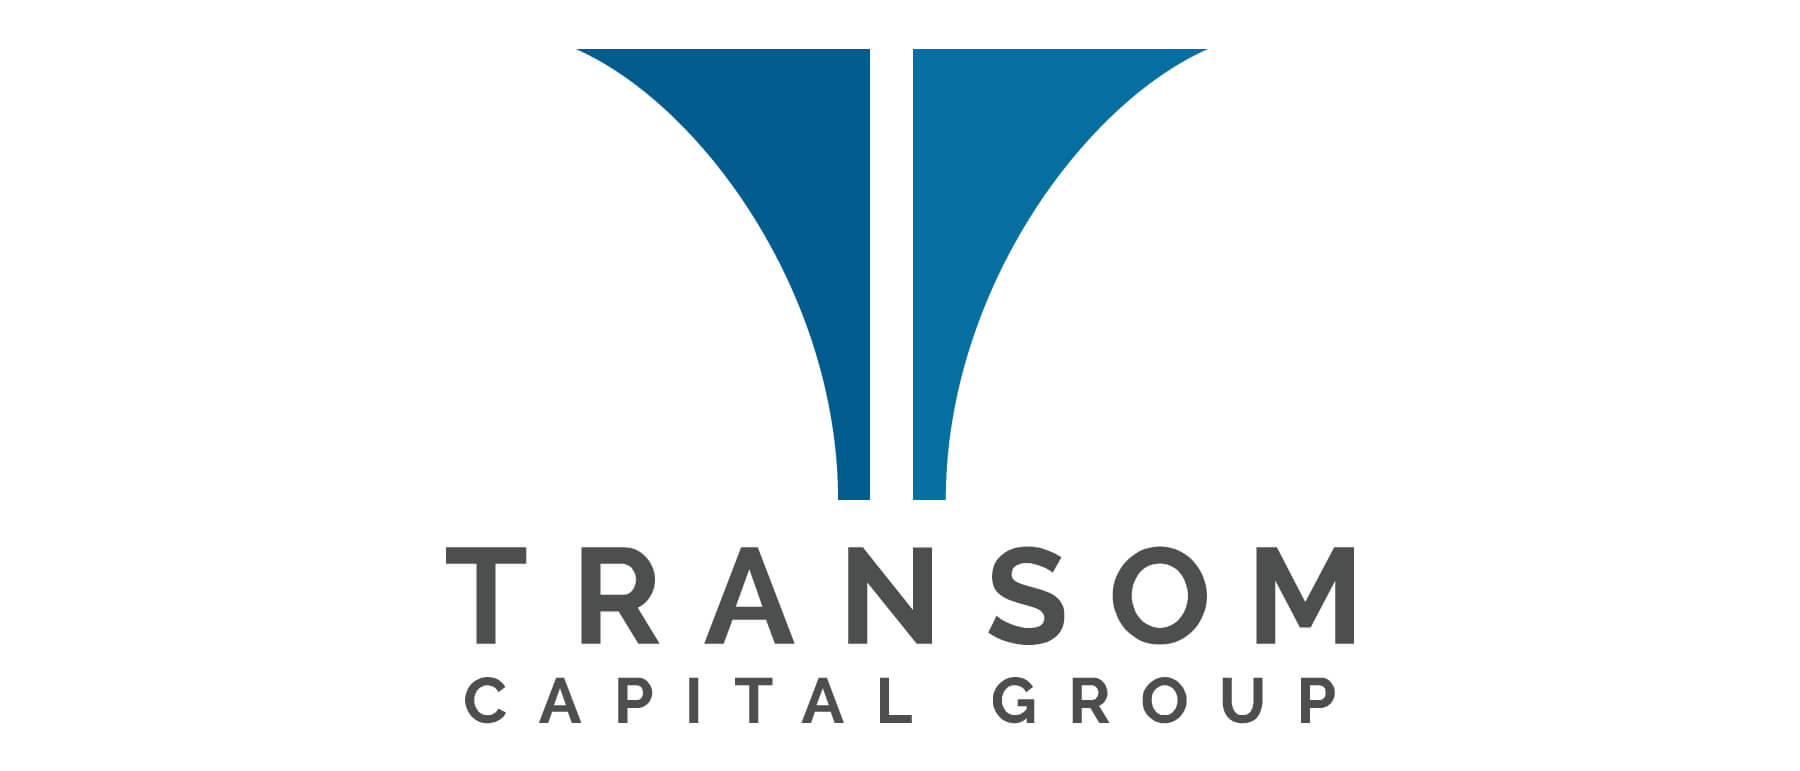 Transom Capital Client Review